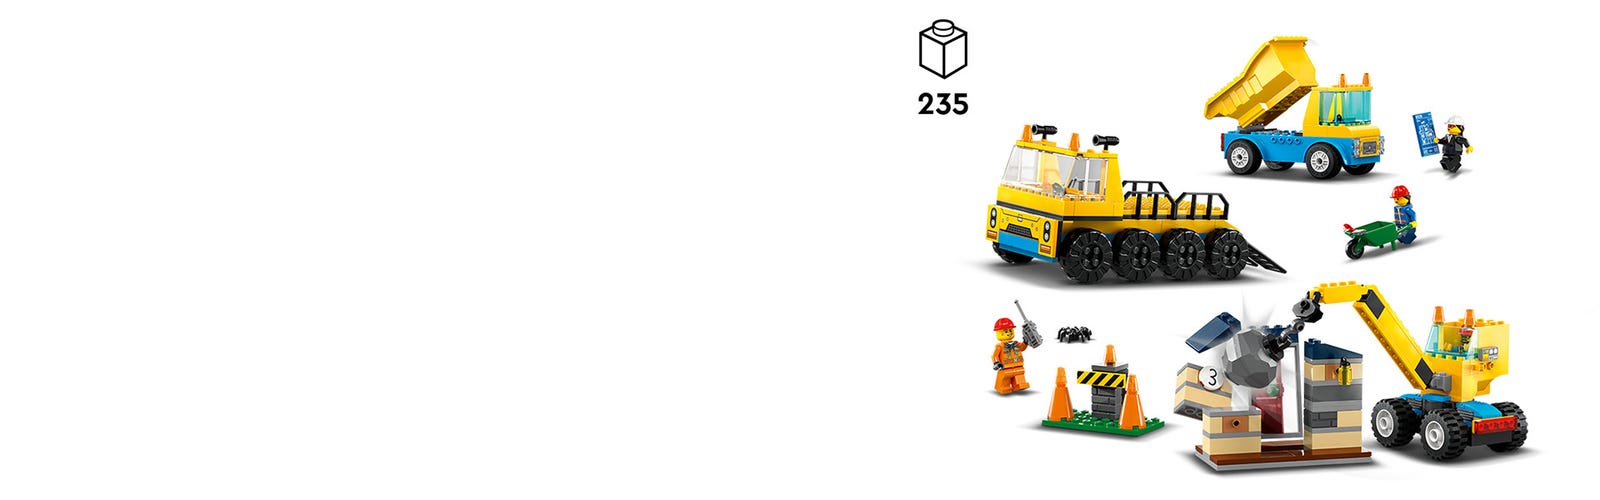 Construction and Wrecking Crane 60391 | City | Buy at the Official LEGO® Shop US